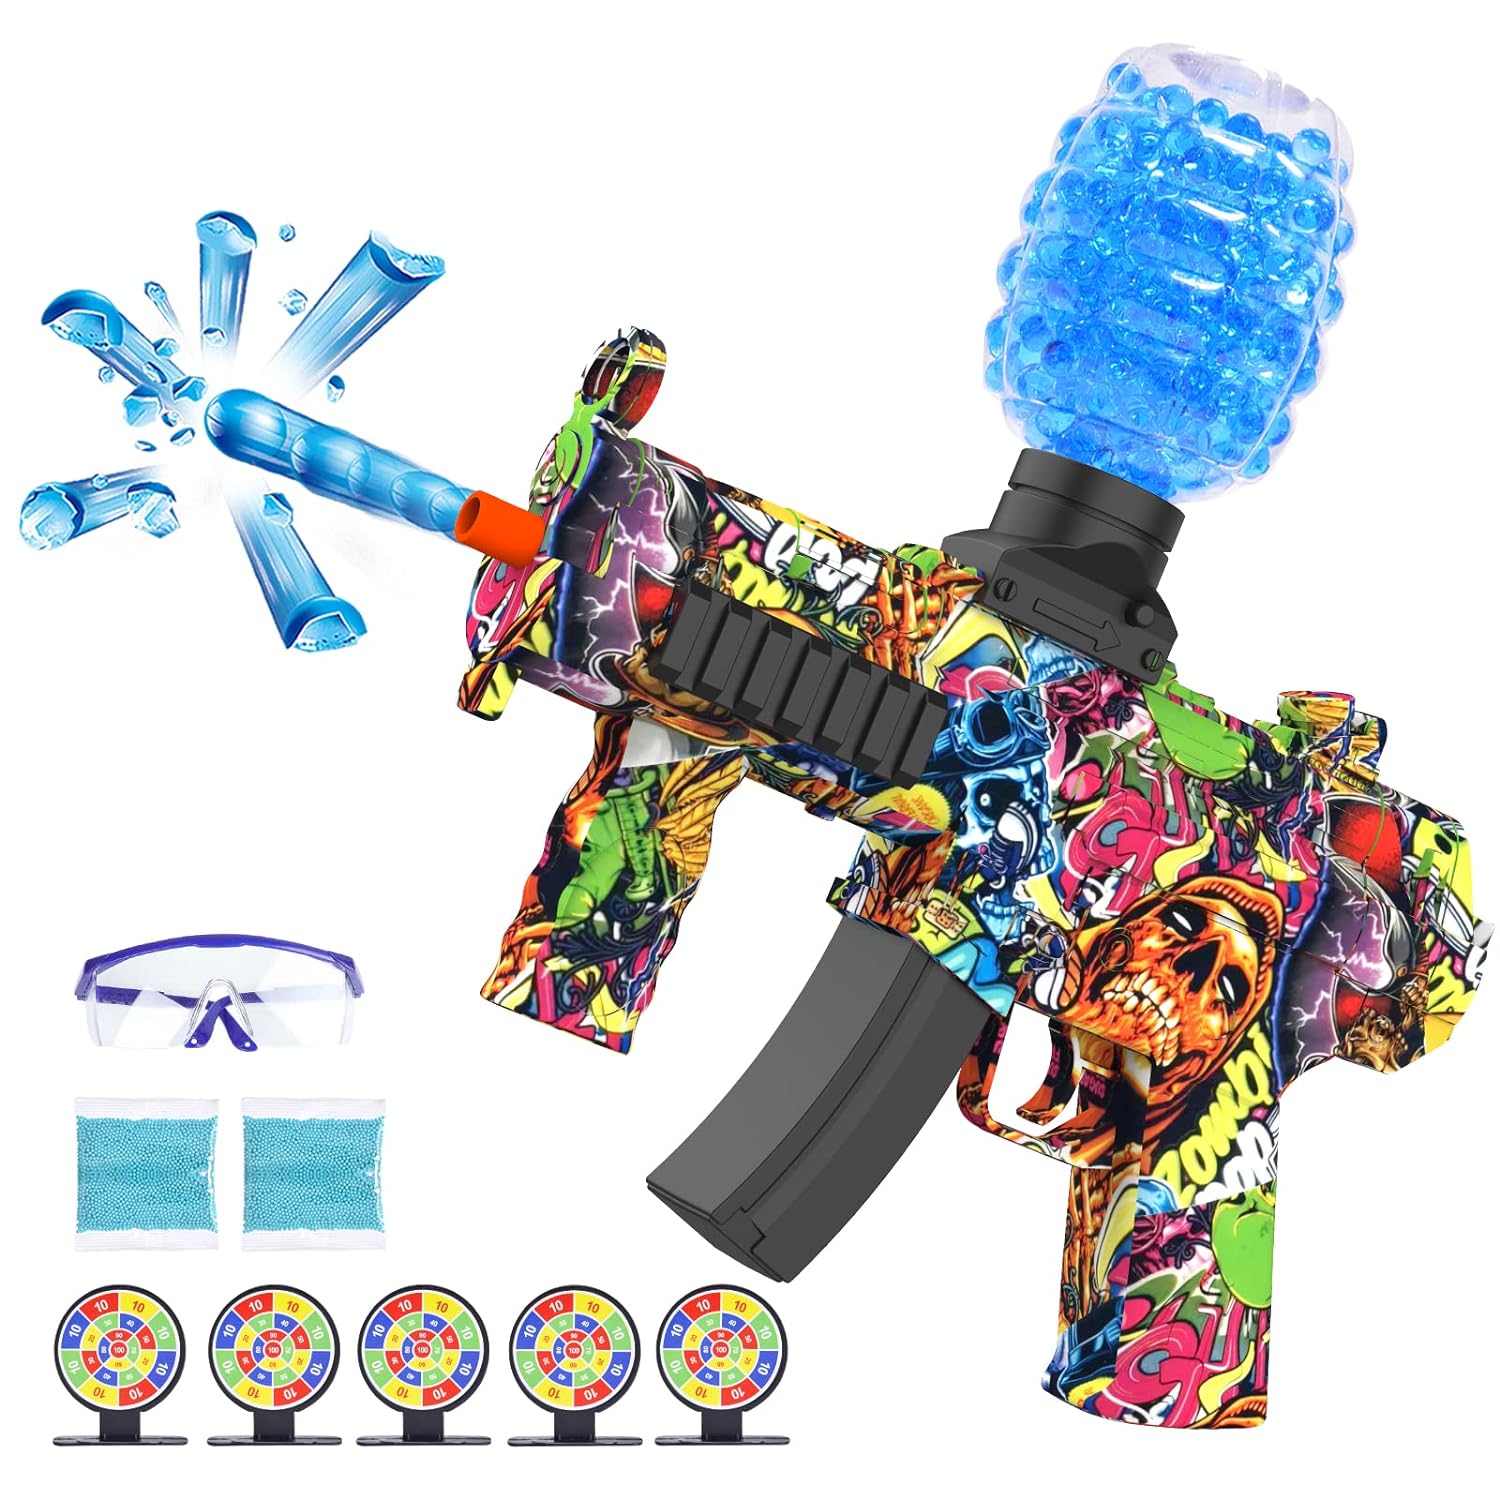 Great Choice Products Electric Gel Balls Splatter Blaster, Christmas & Birthday Gift For 9 10 11 12 13 14 15 16+ Year Old Boy Gift Ideas, Toys F